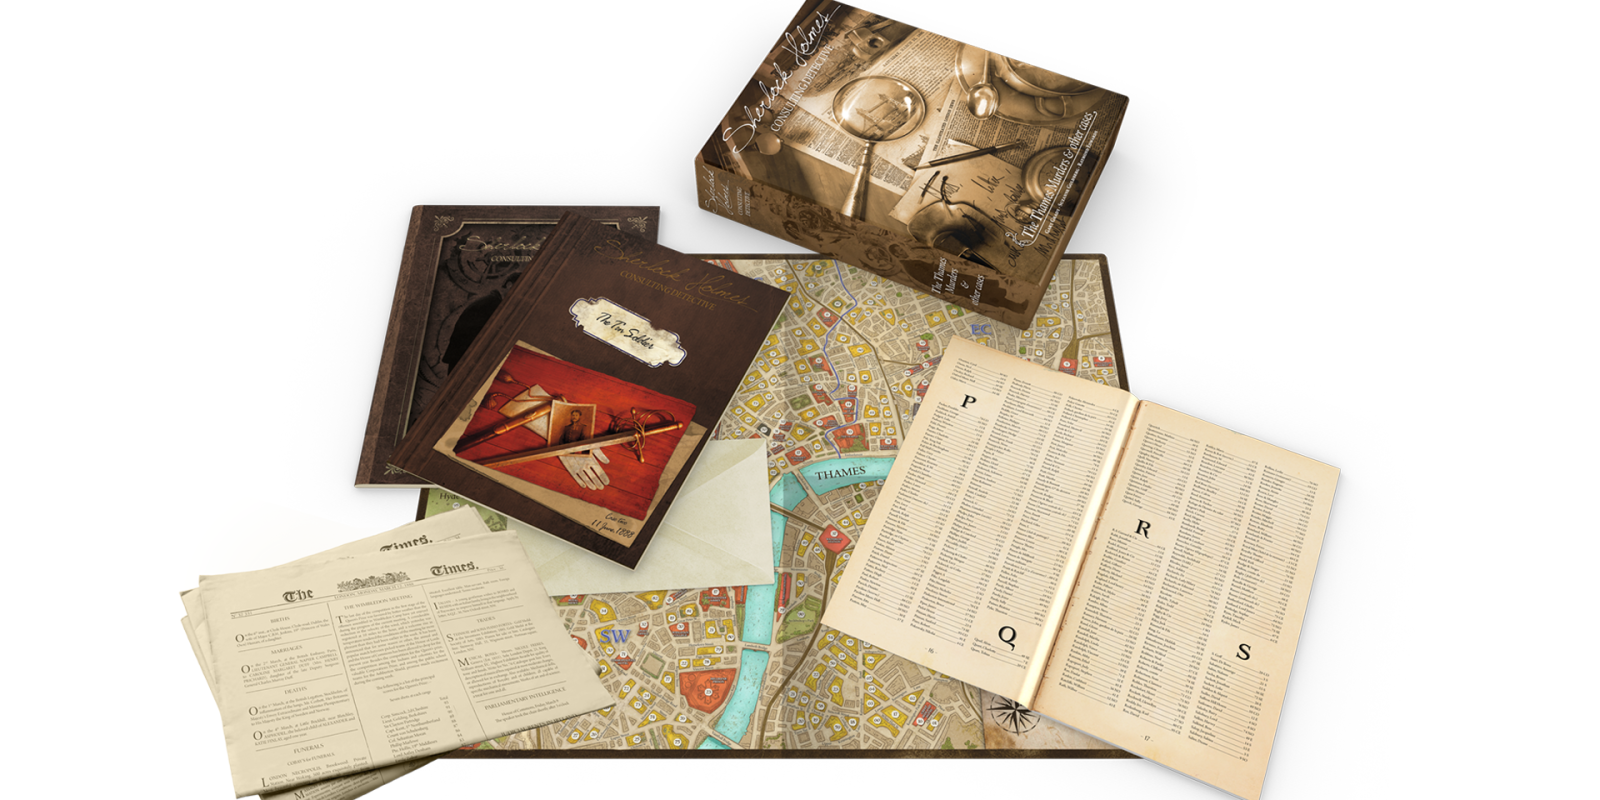 Sherlock Holmes Consulting Detective Board Game Contents Inside The Box